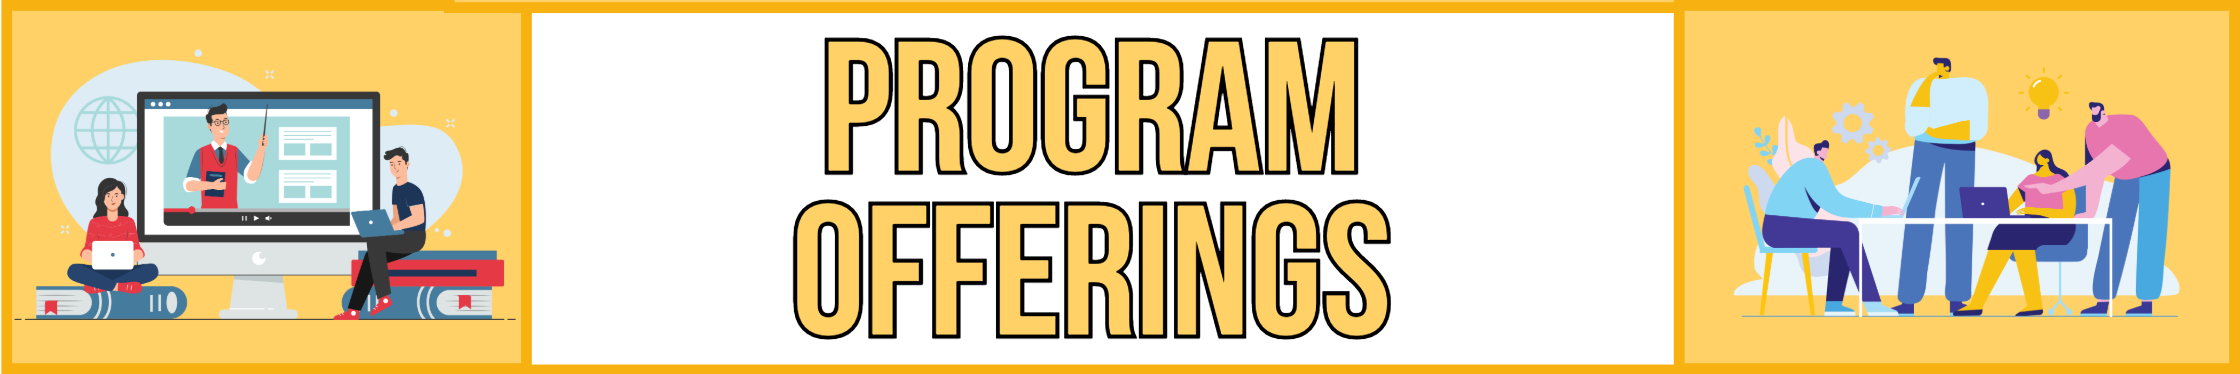 Banner for Program offerings page